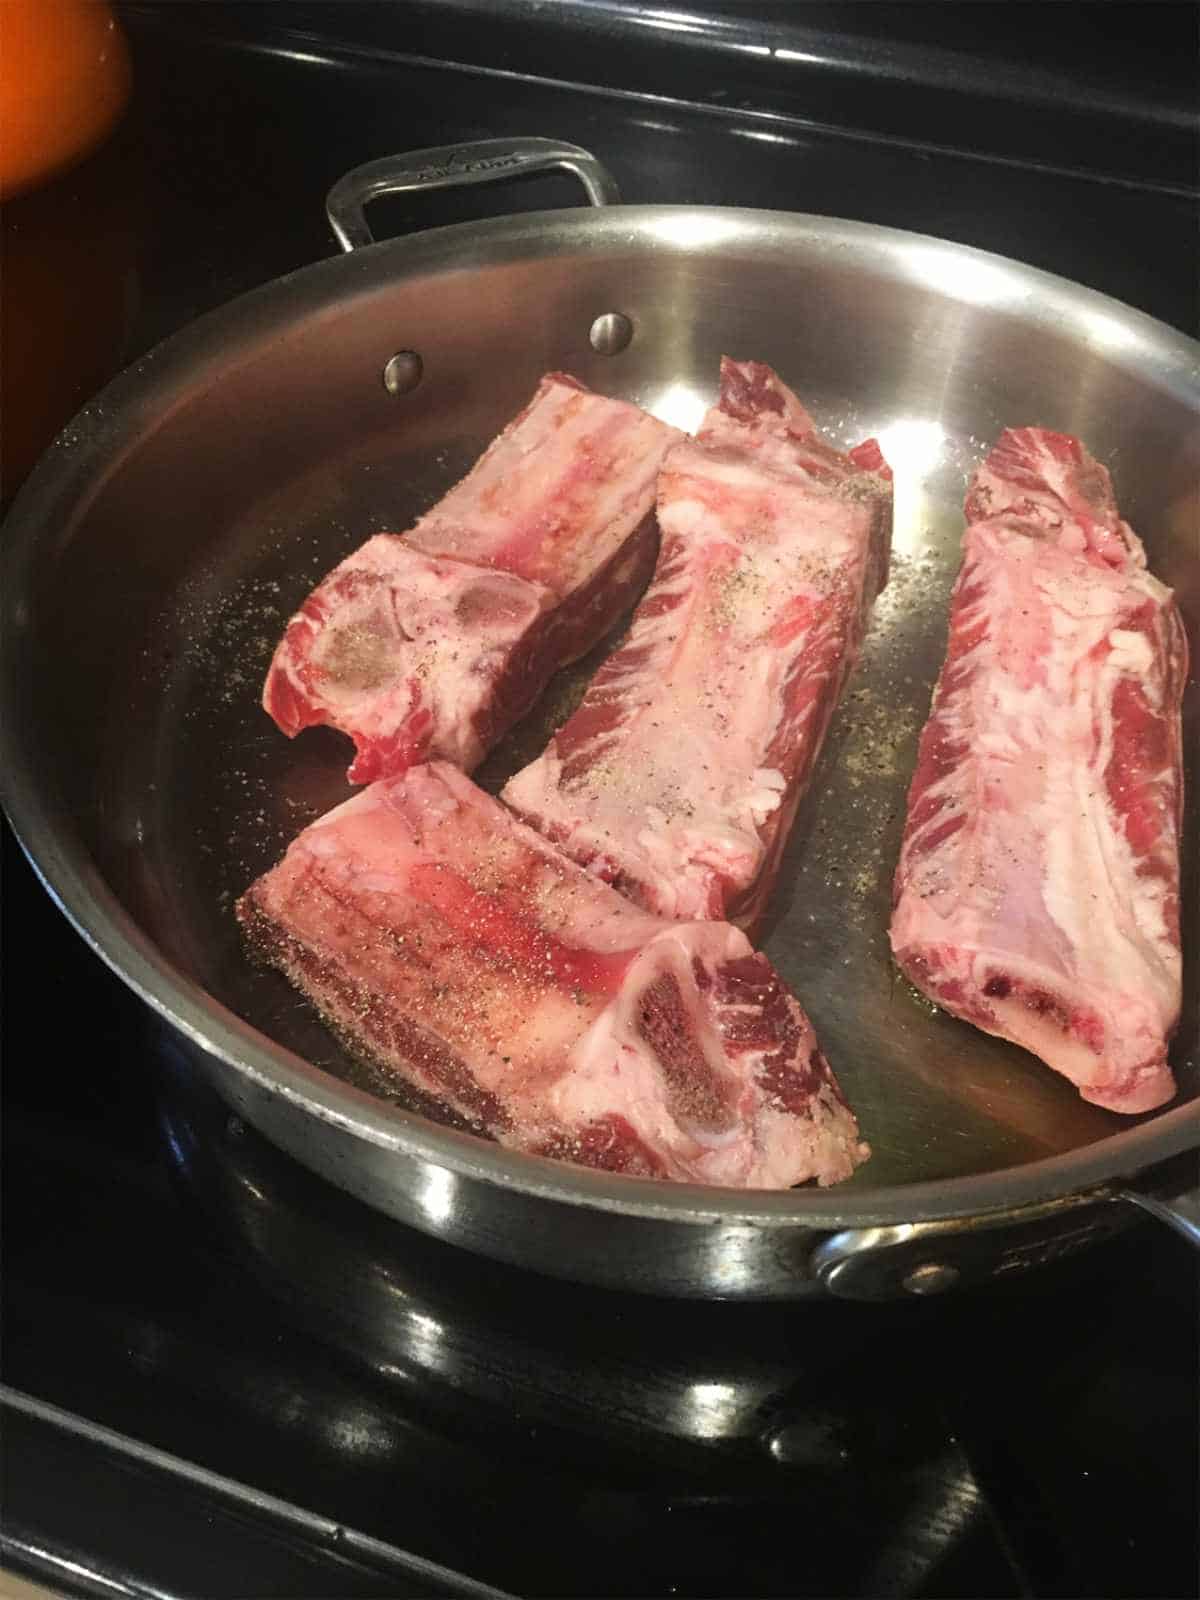 browning raw ribs in a skillet.